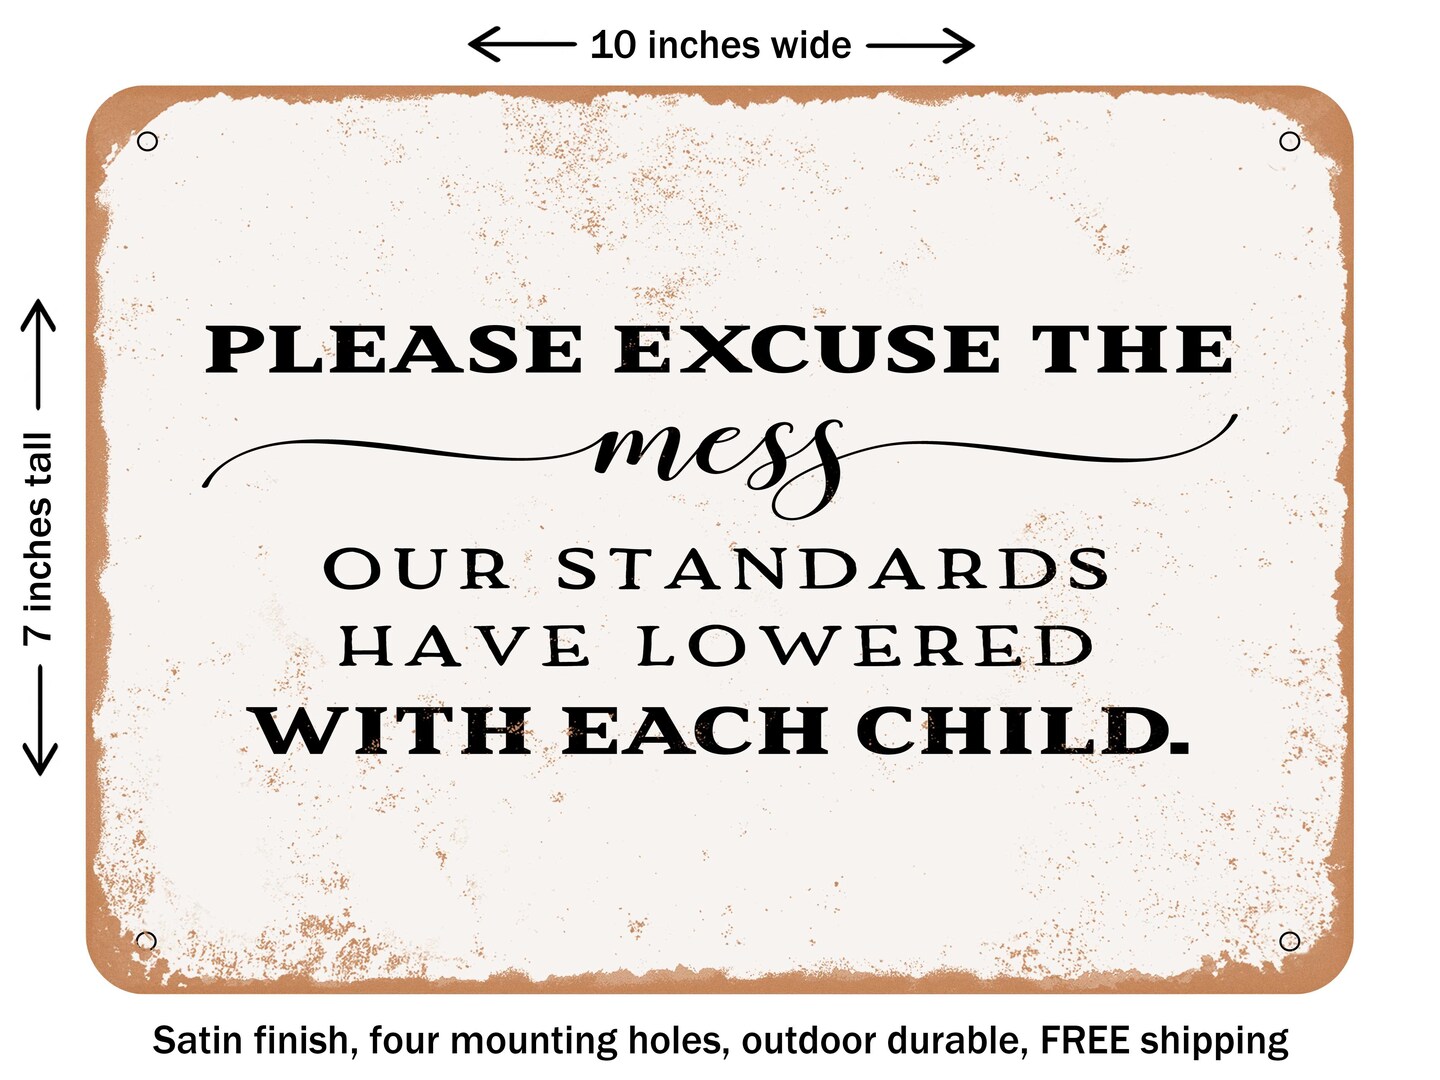 DECORATIVE METAL SIGN - Please Excuse the Mess Child - Vintage Rusty Look